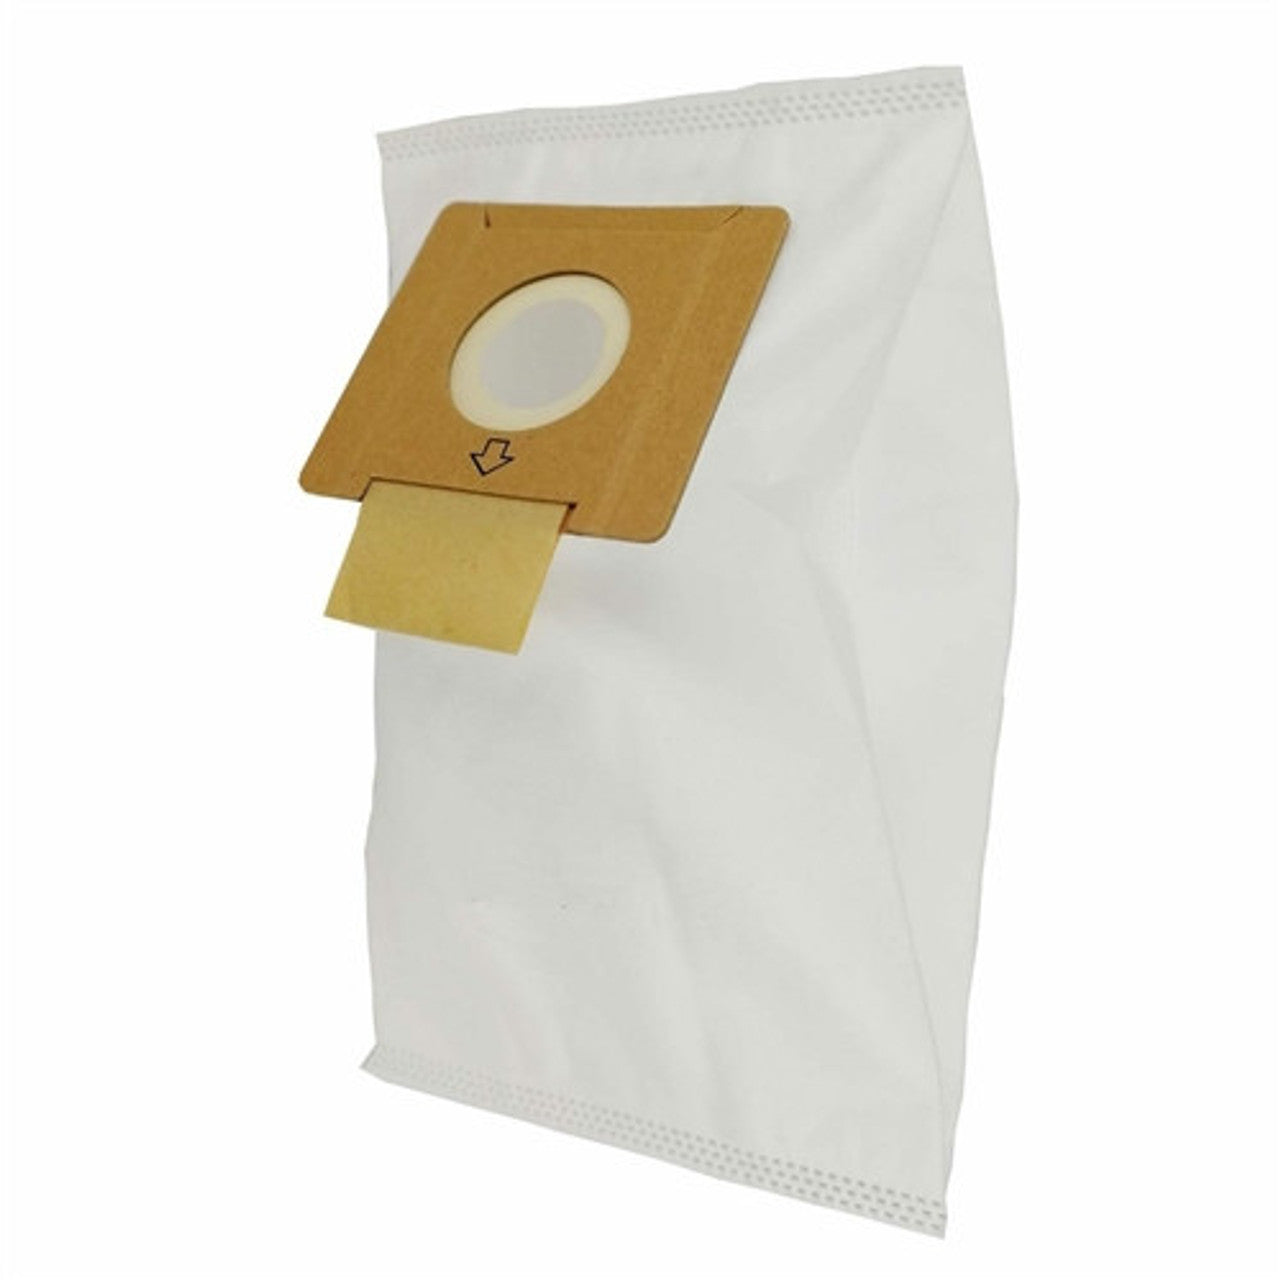 10 X Dust Bags for Sauber Pro Pets SJ-100 Vacuum Cleaners - SILBERSHELL